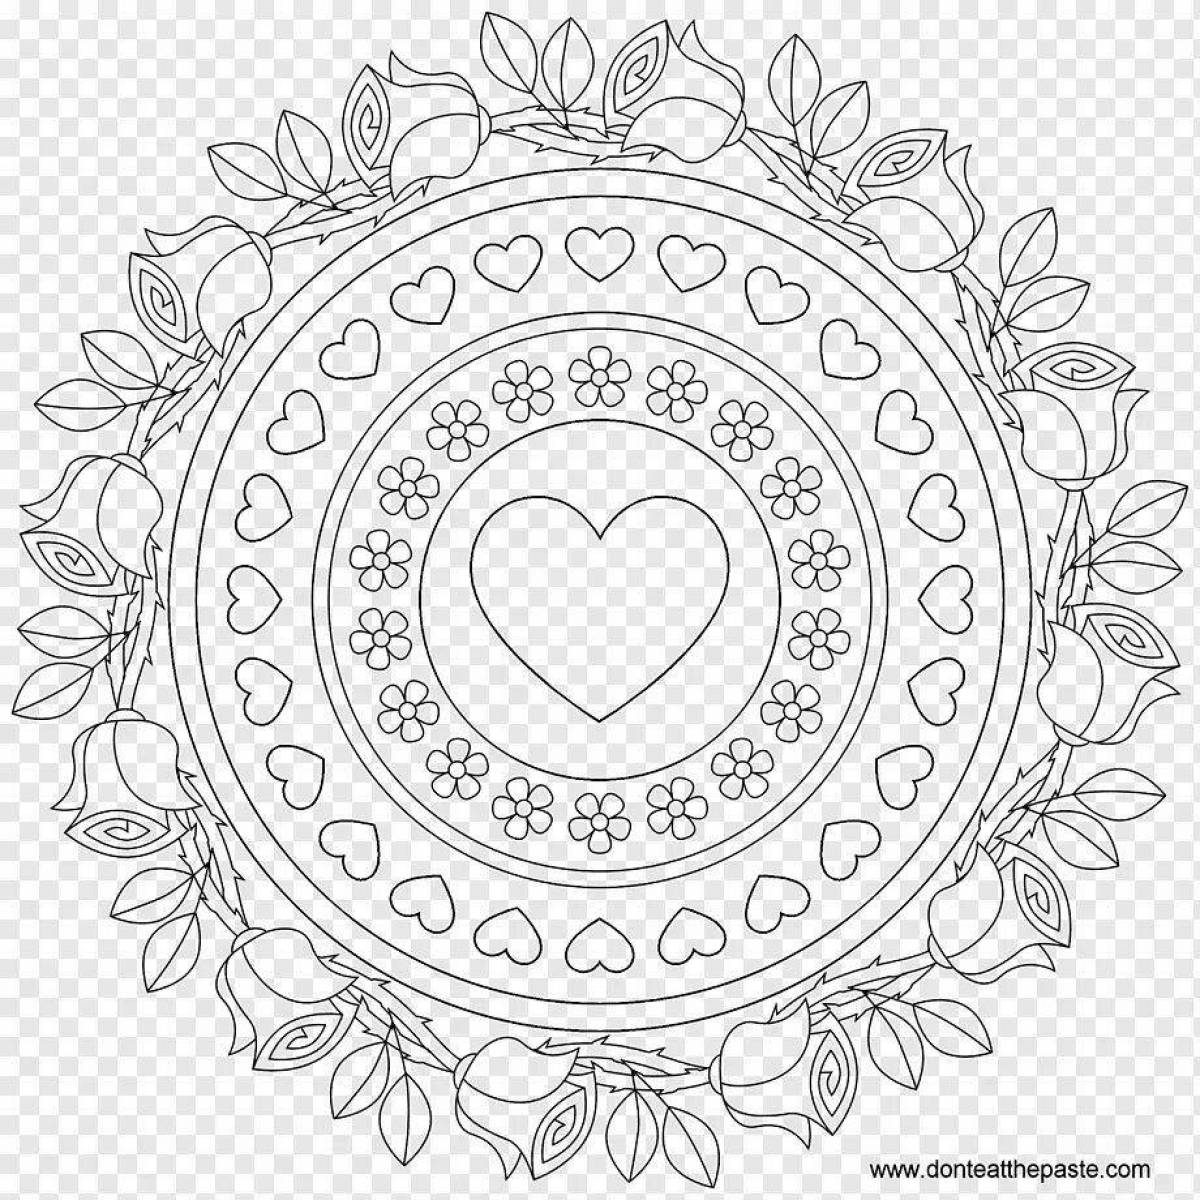 Playful mantra coloring pages for toddlers